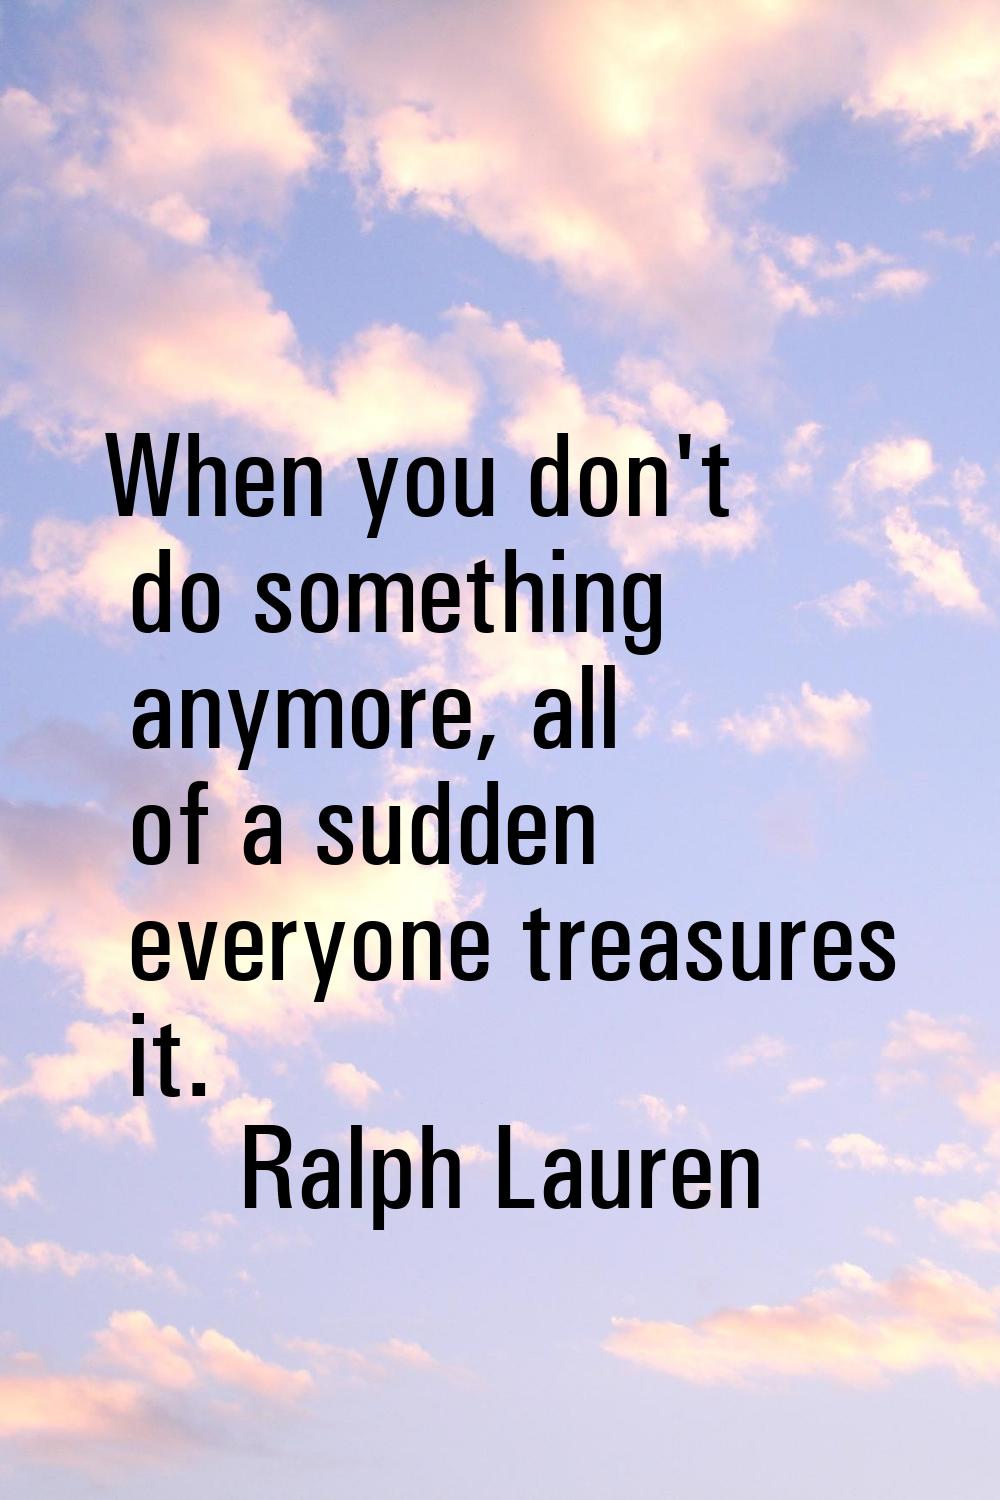 When you don't do something anymore, all of a sudden everyone treasures it.